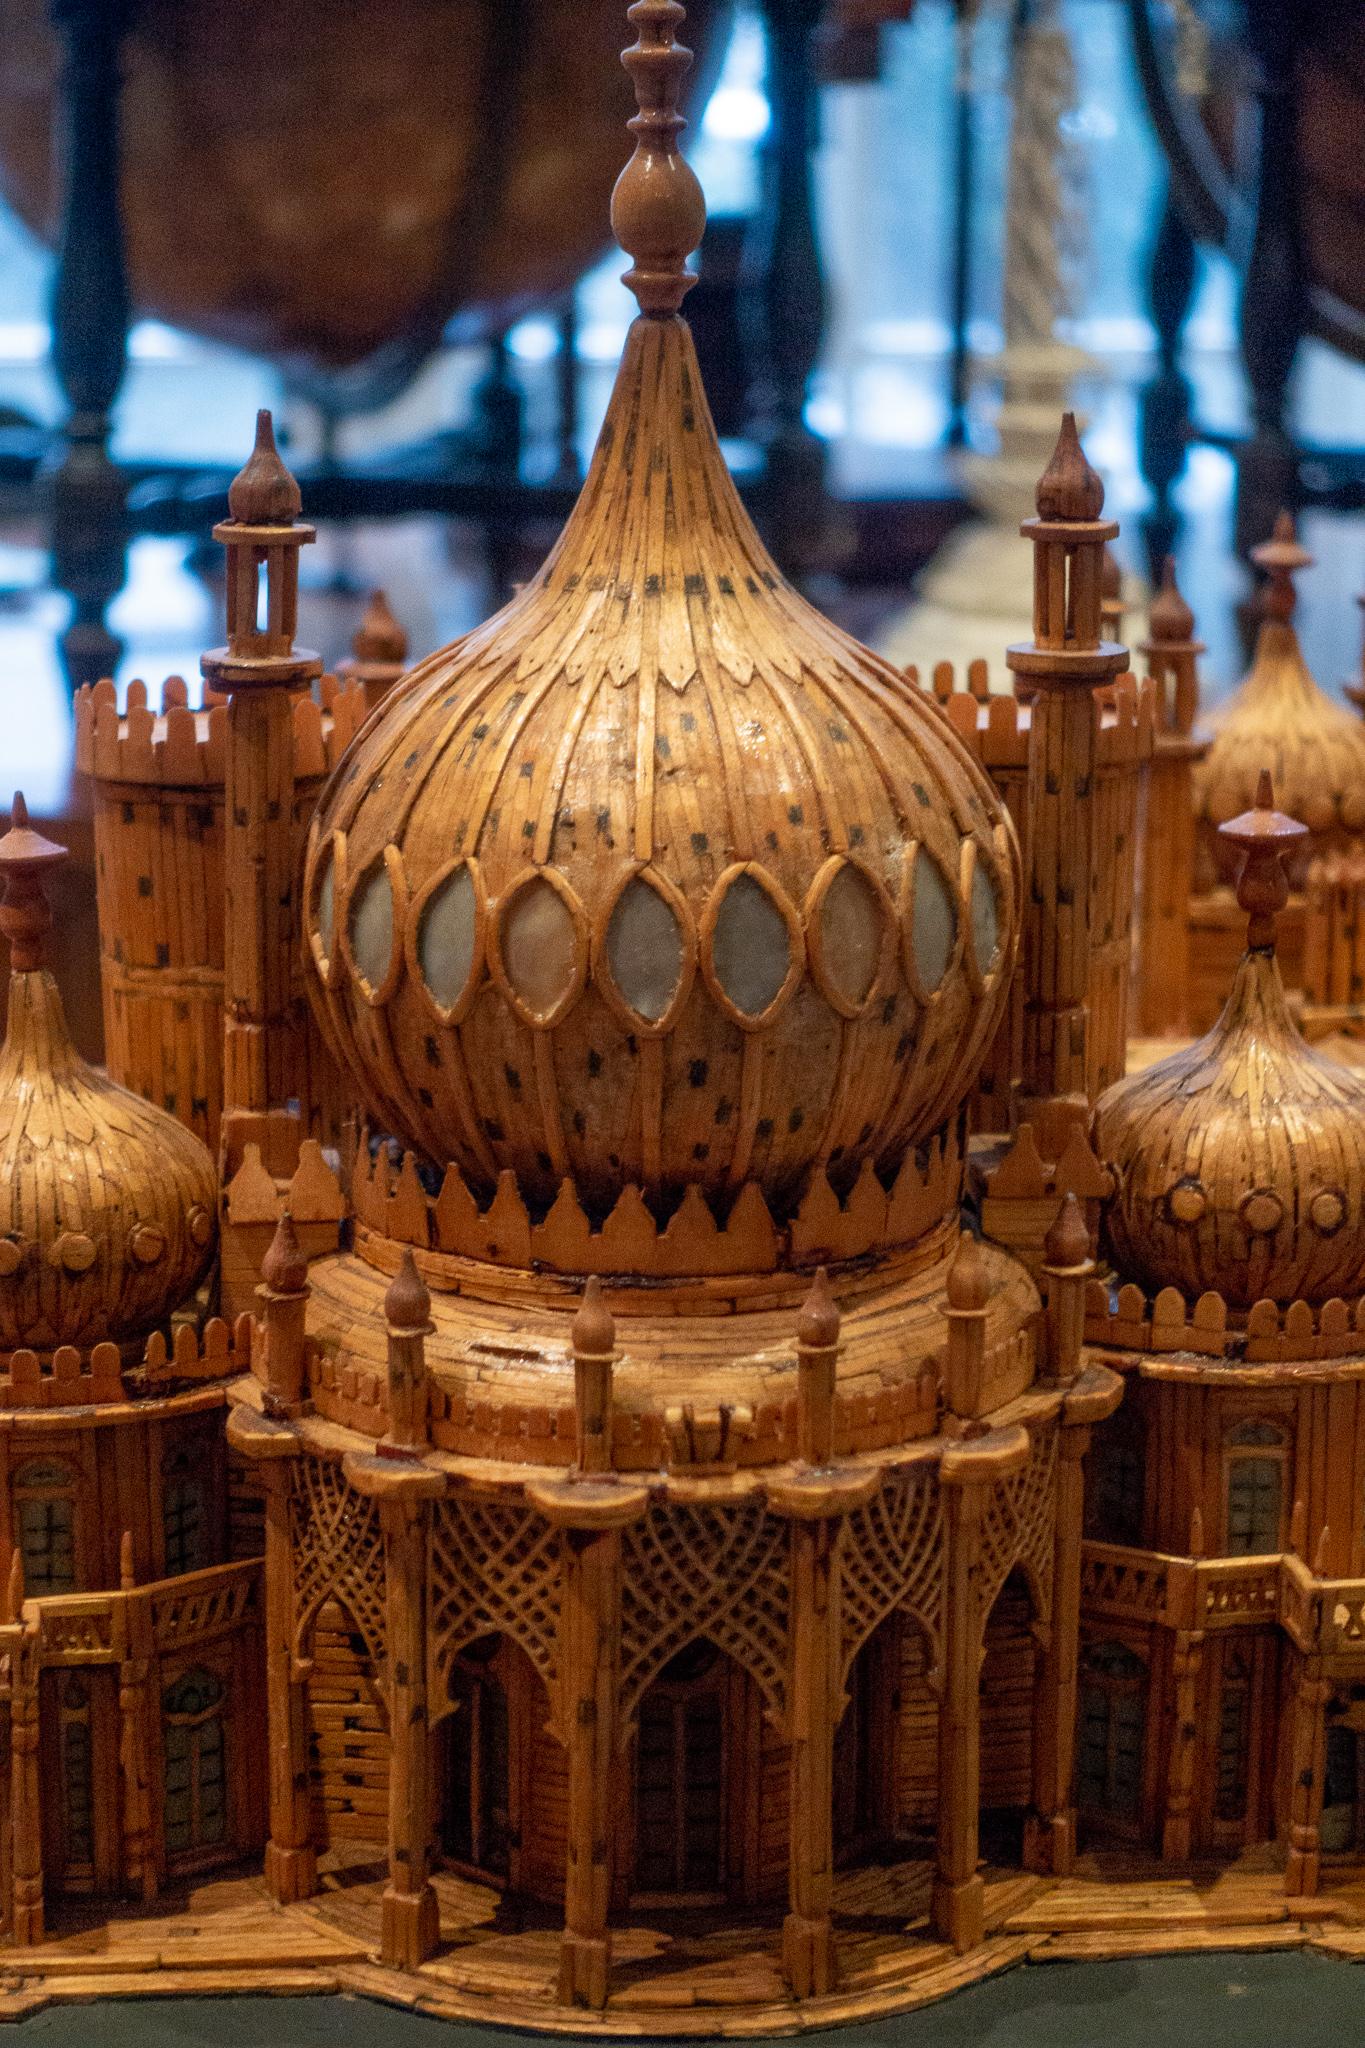 Royal Brighton Pavilion Matchstick Architectural Model by Bernard Martell For Sale 1